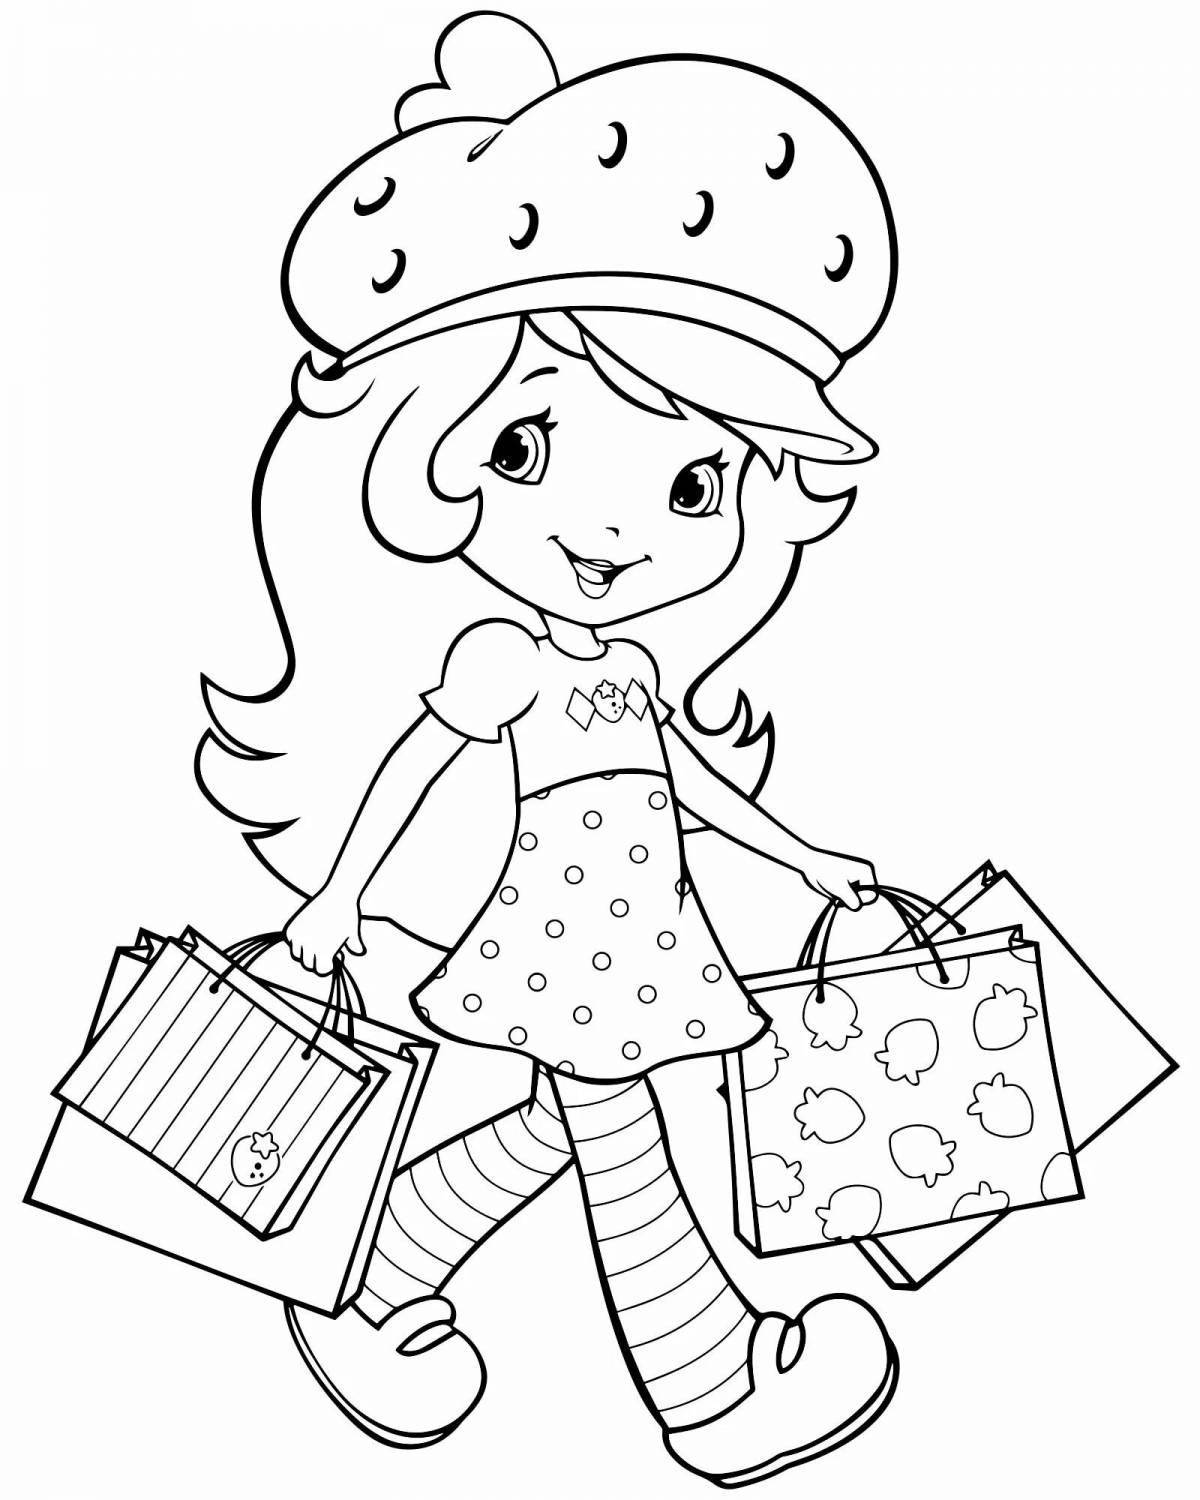 Adorable Charlotte Strawberry coloring pages for girls